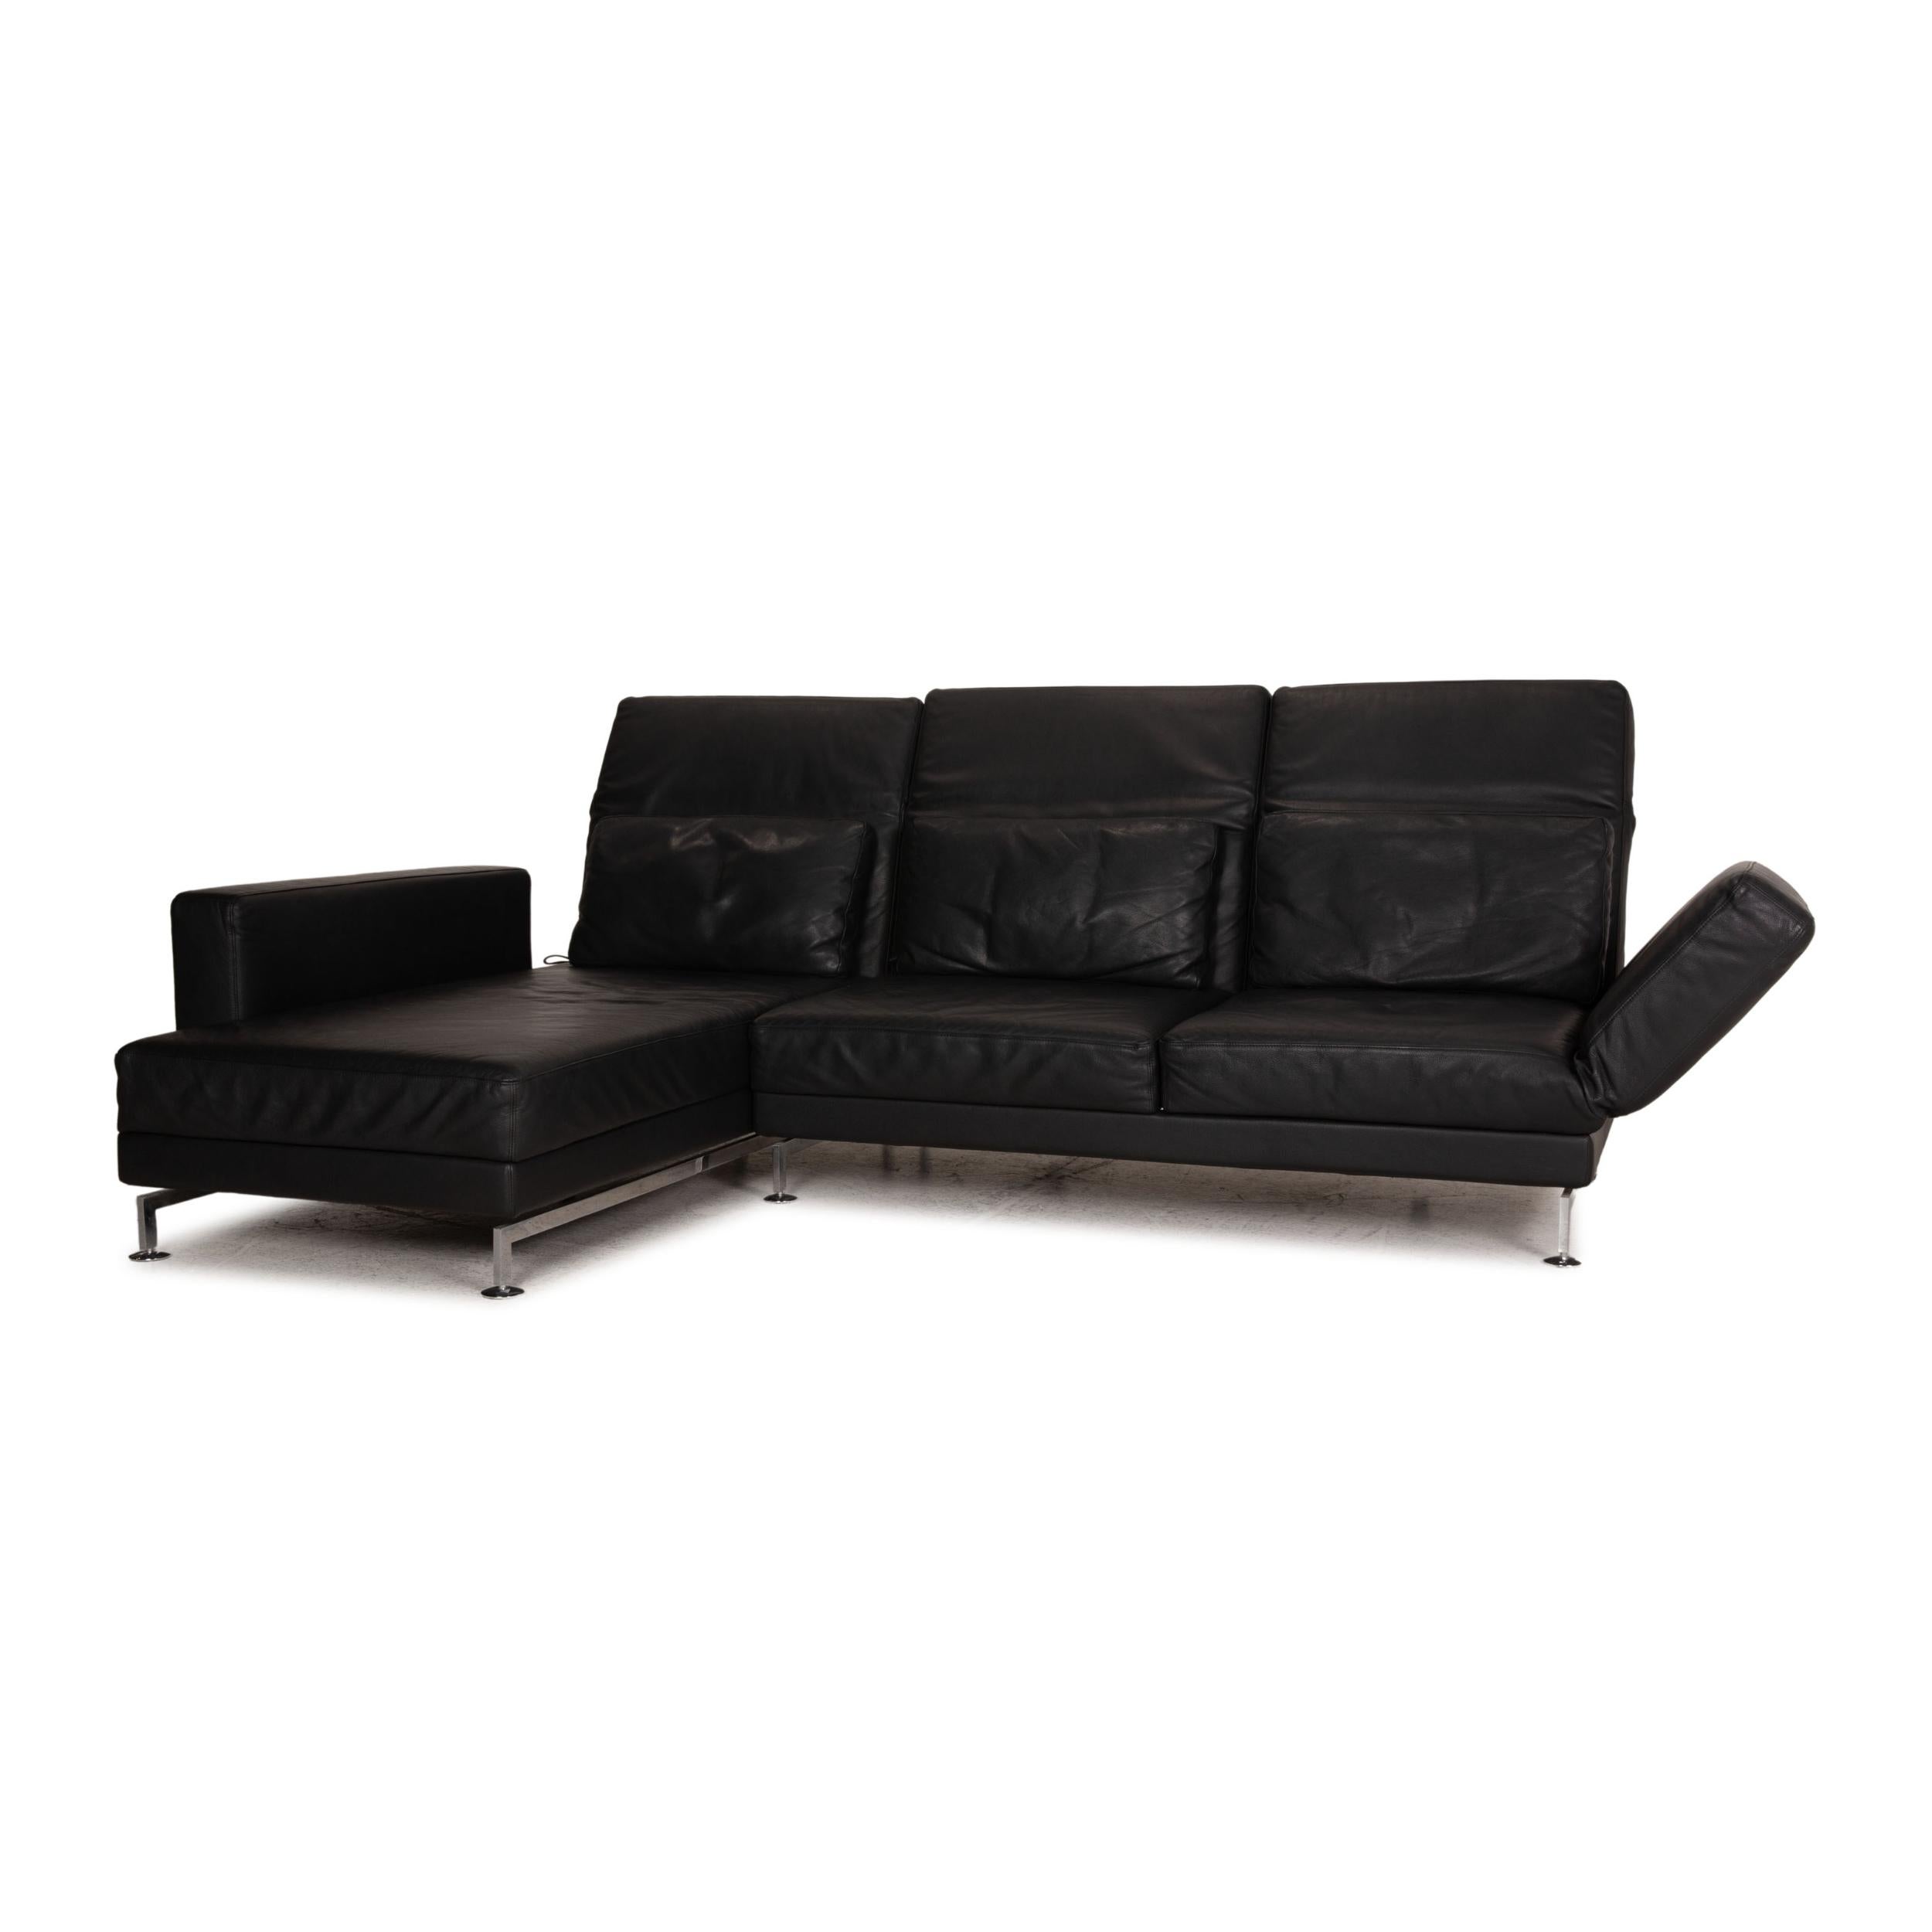 Brühl & Sippold Moule Leather Sofa Black Corner Sofa Couch Function For Sale 3